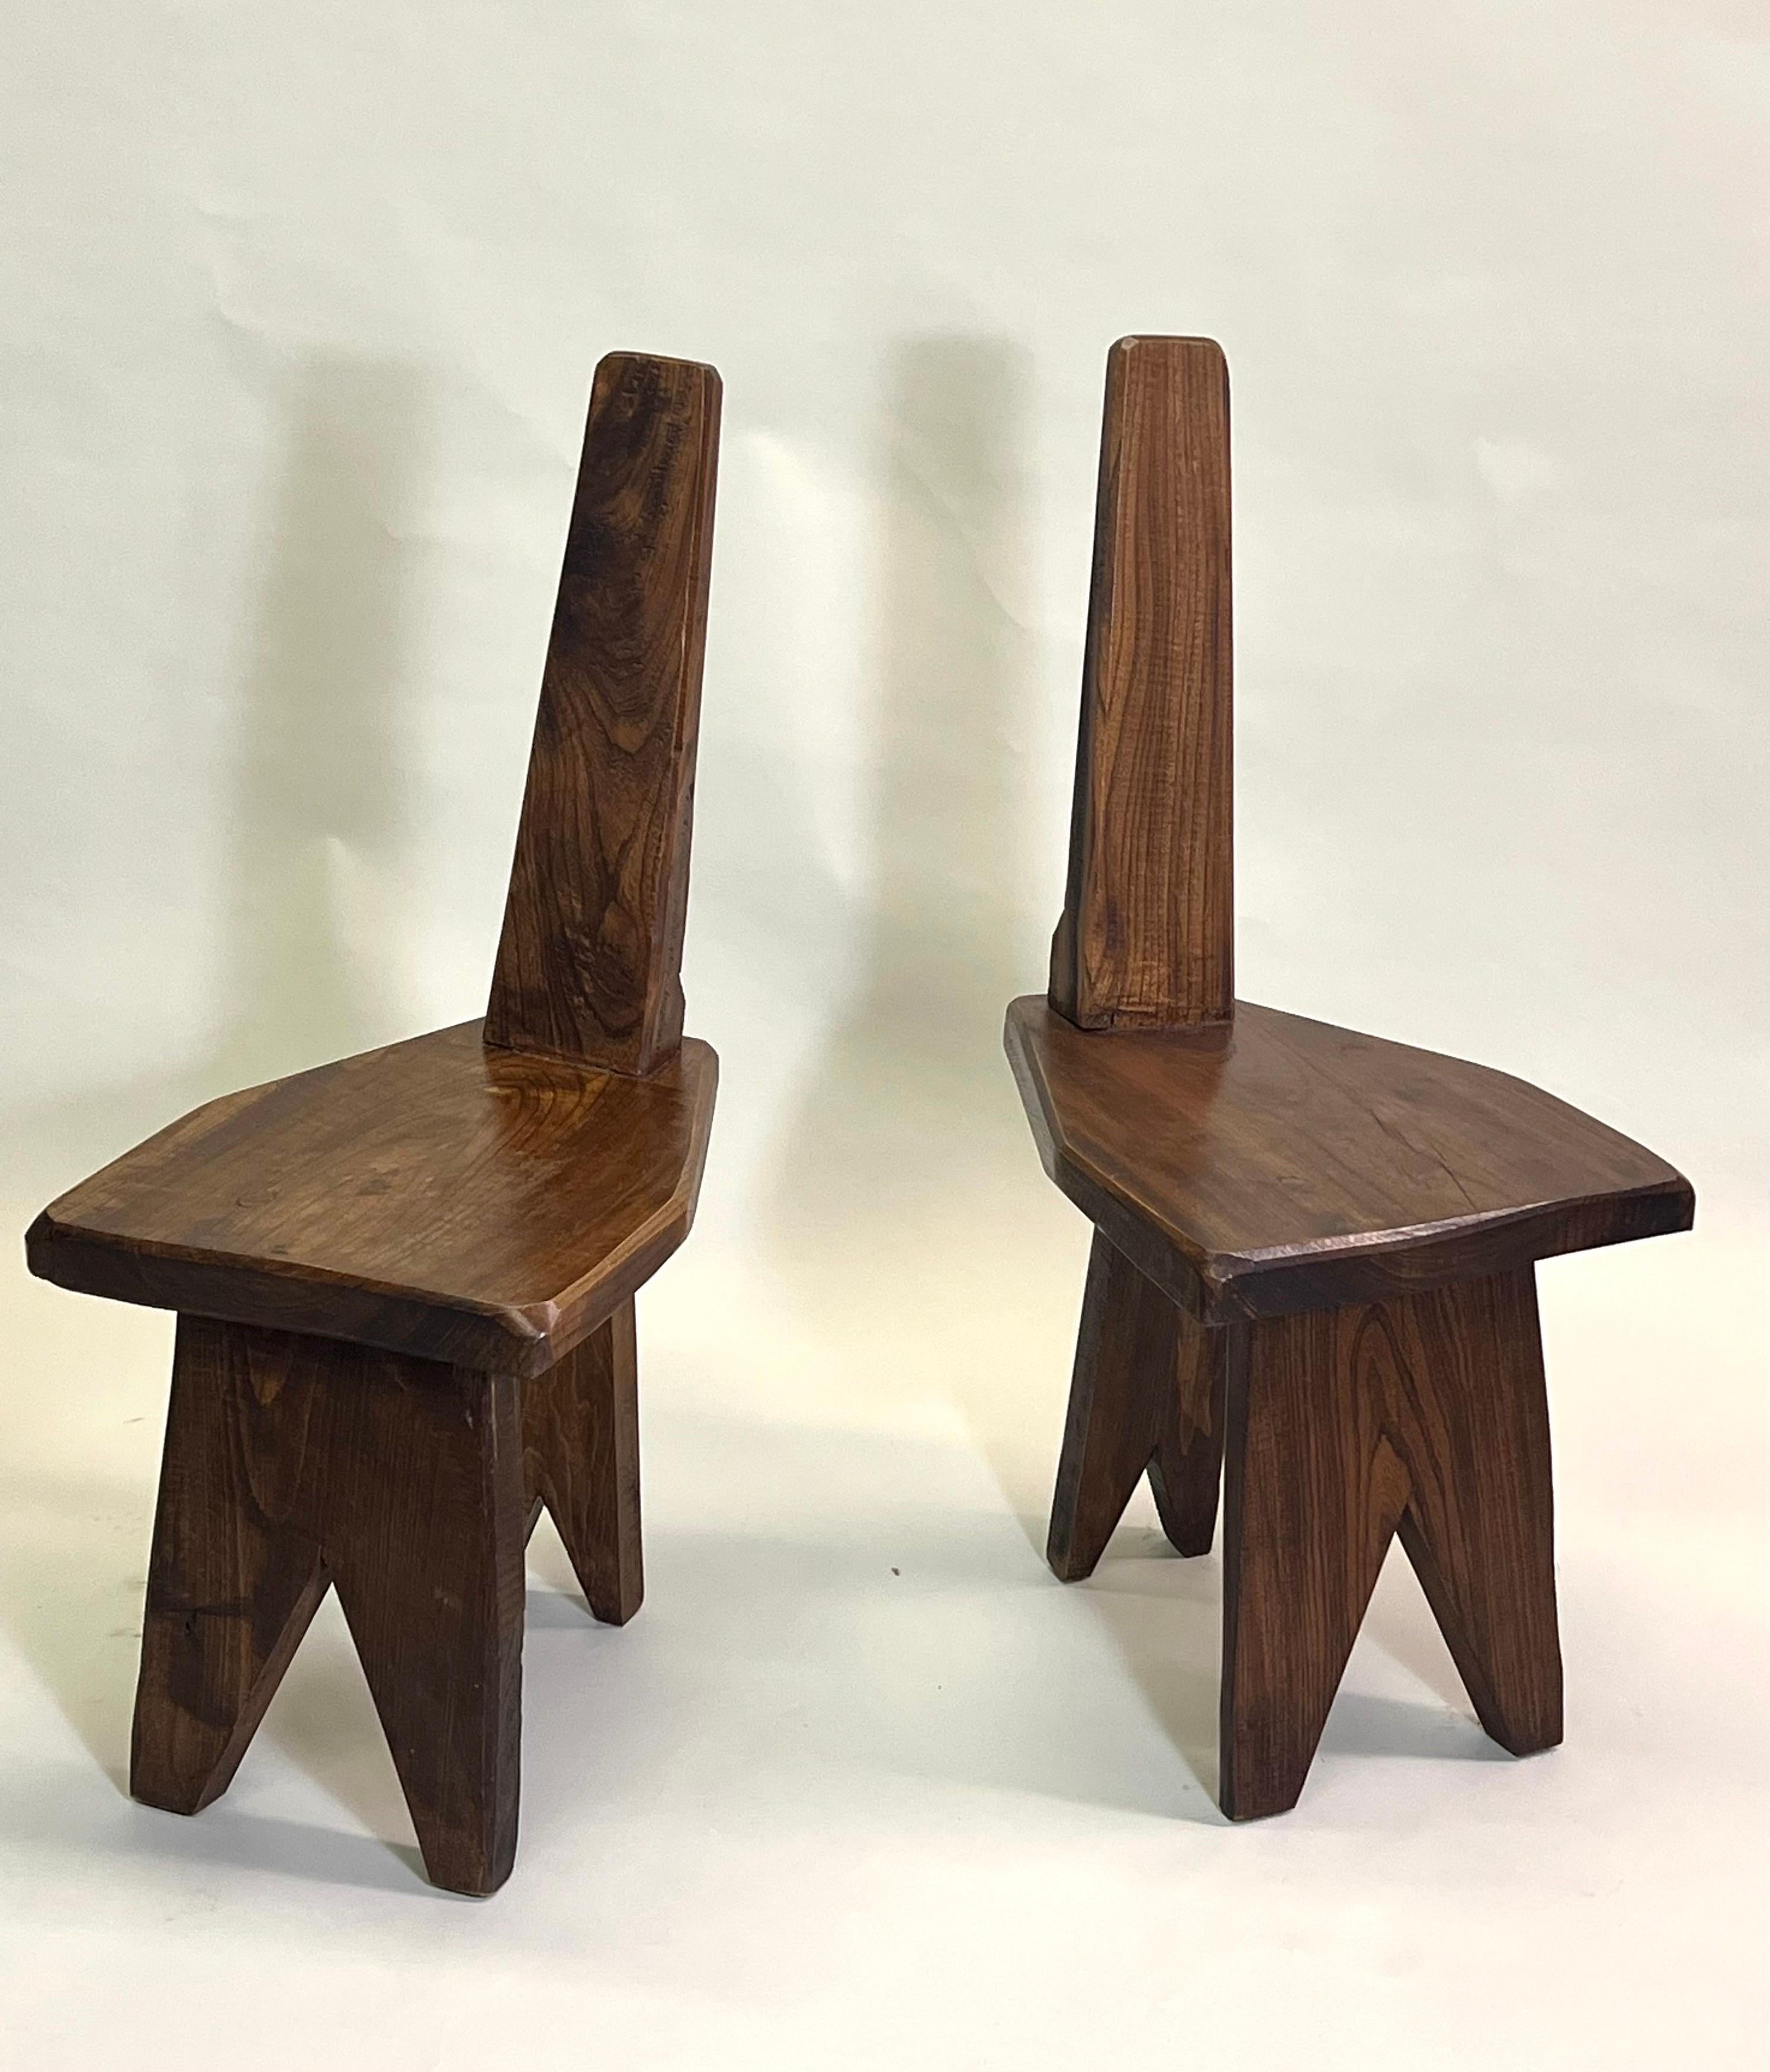 20th Century Rare Pair of French Mid-Century Modern Craftsman Wood Chairs, Pierre Jeanneret For Sale